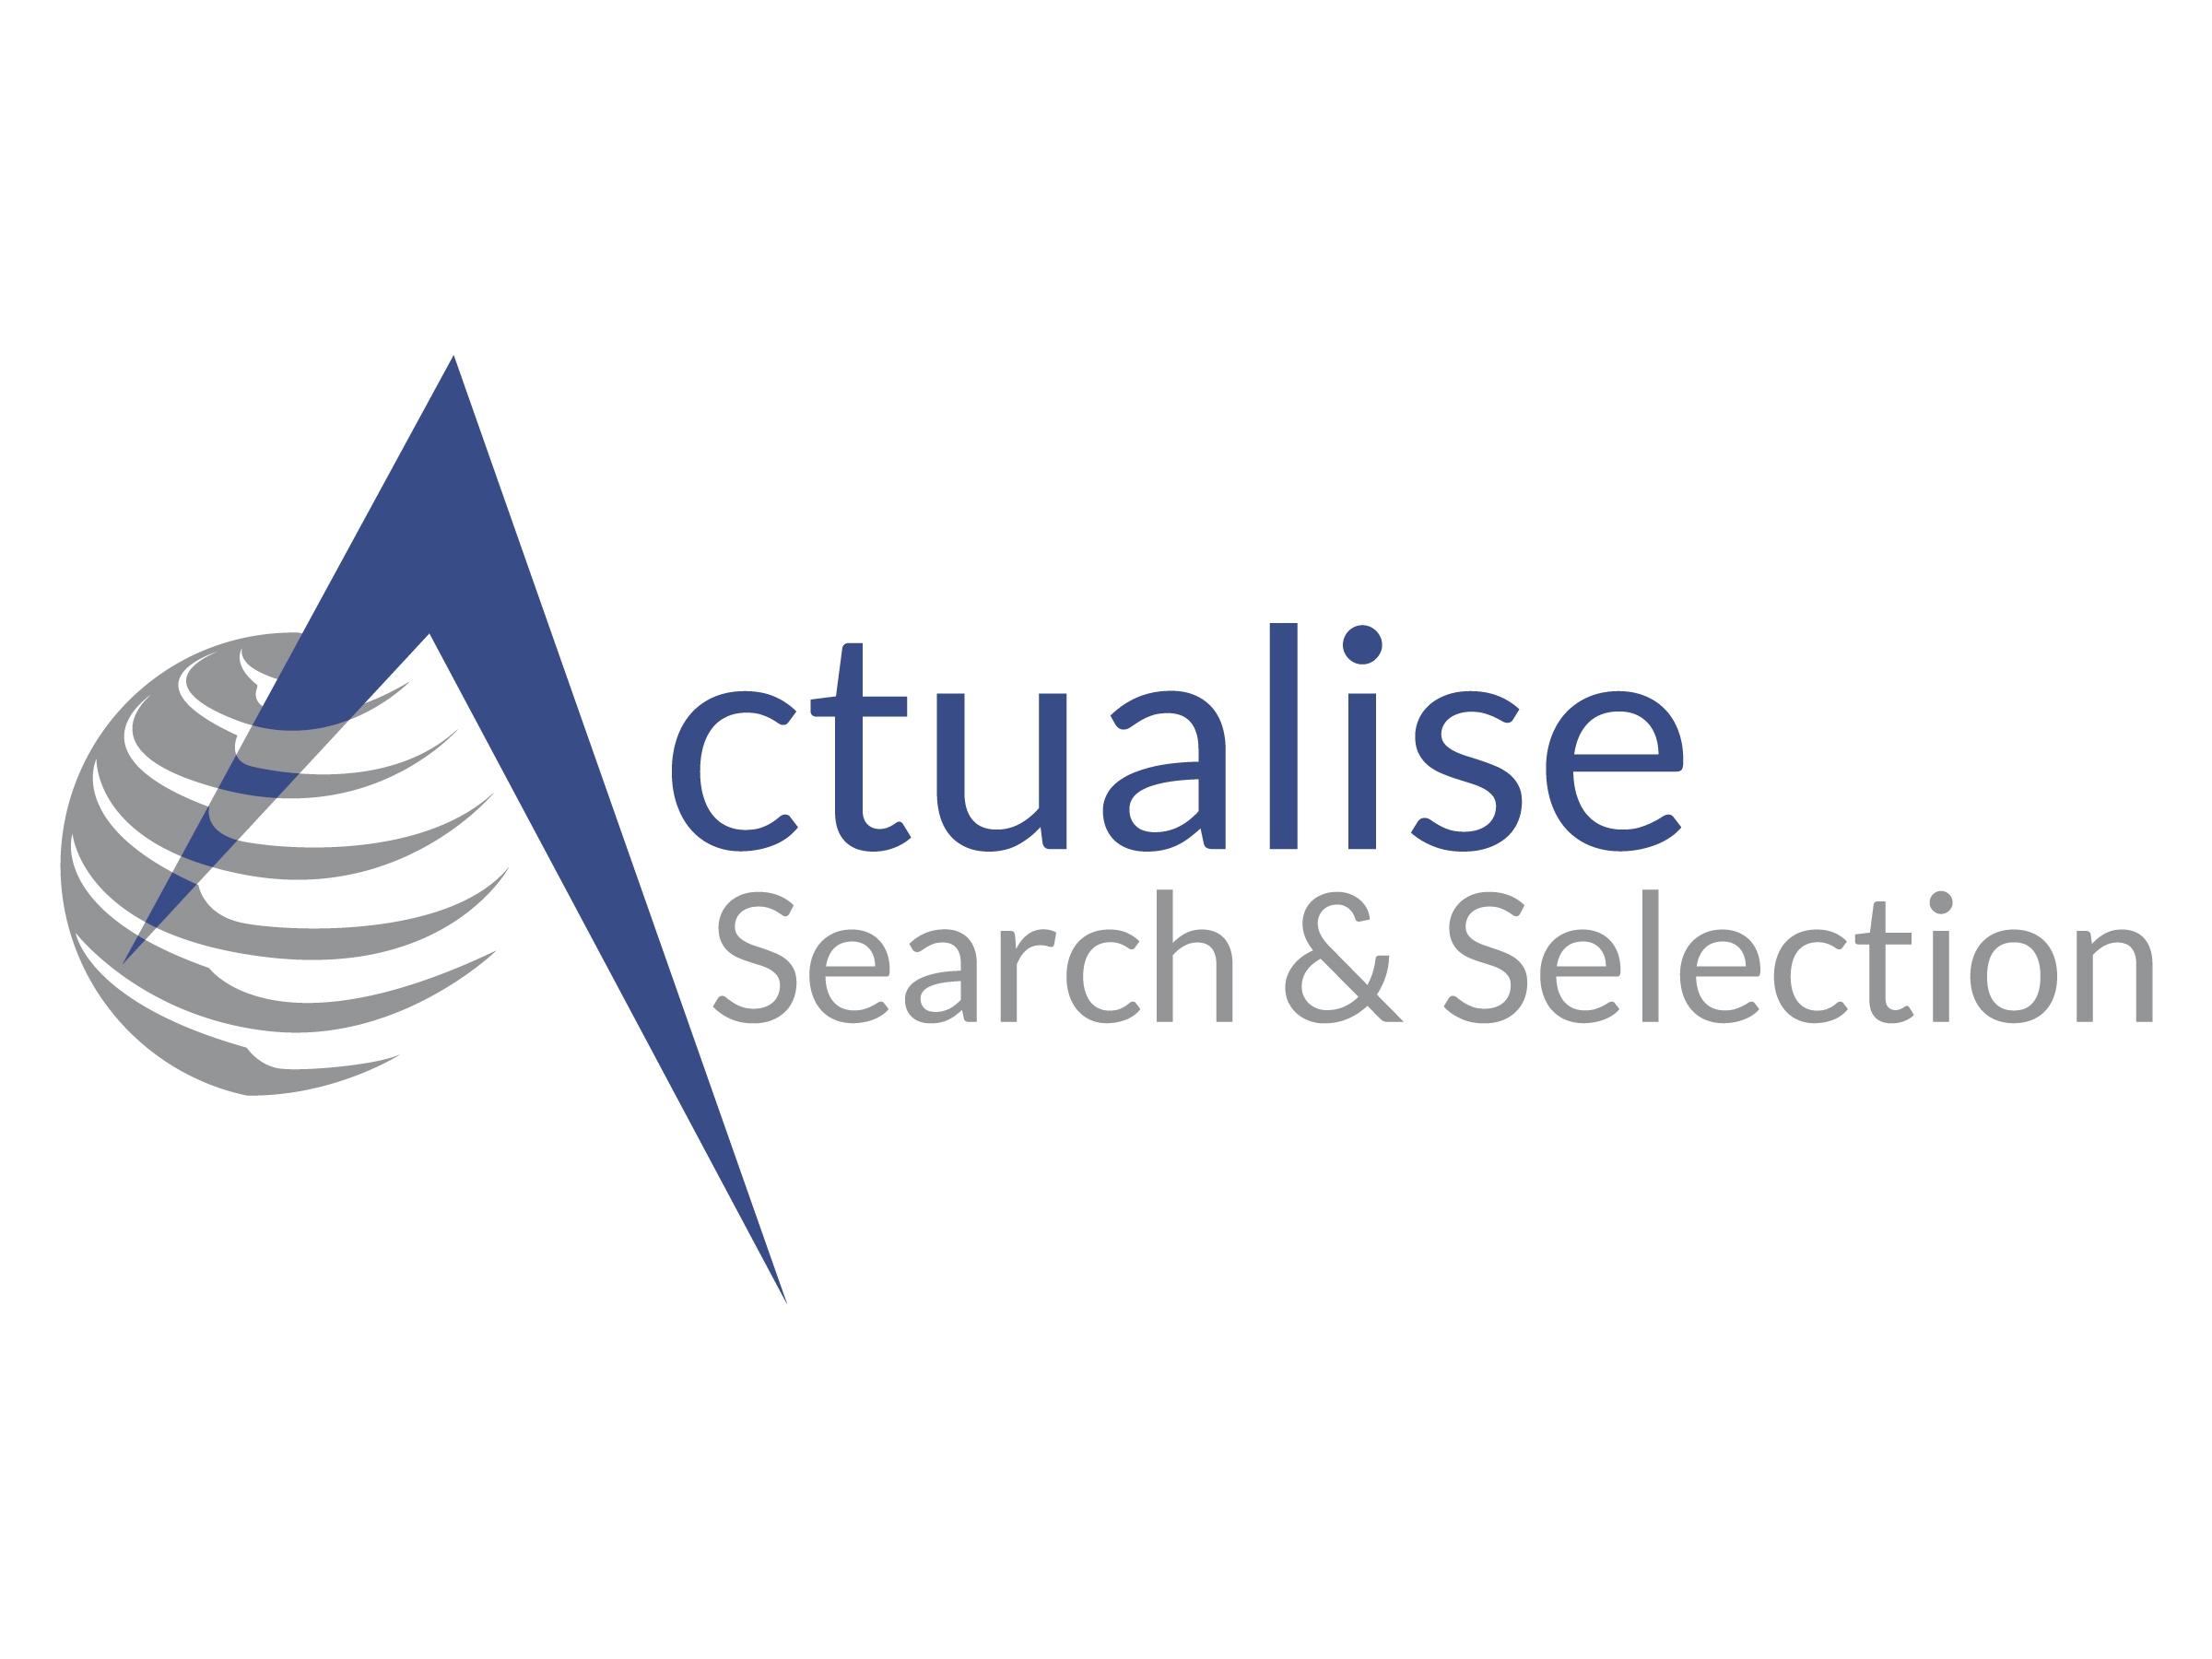 ACTUALISE Search & Selection